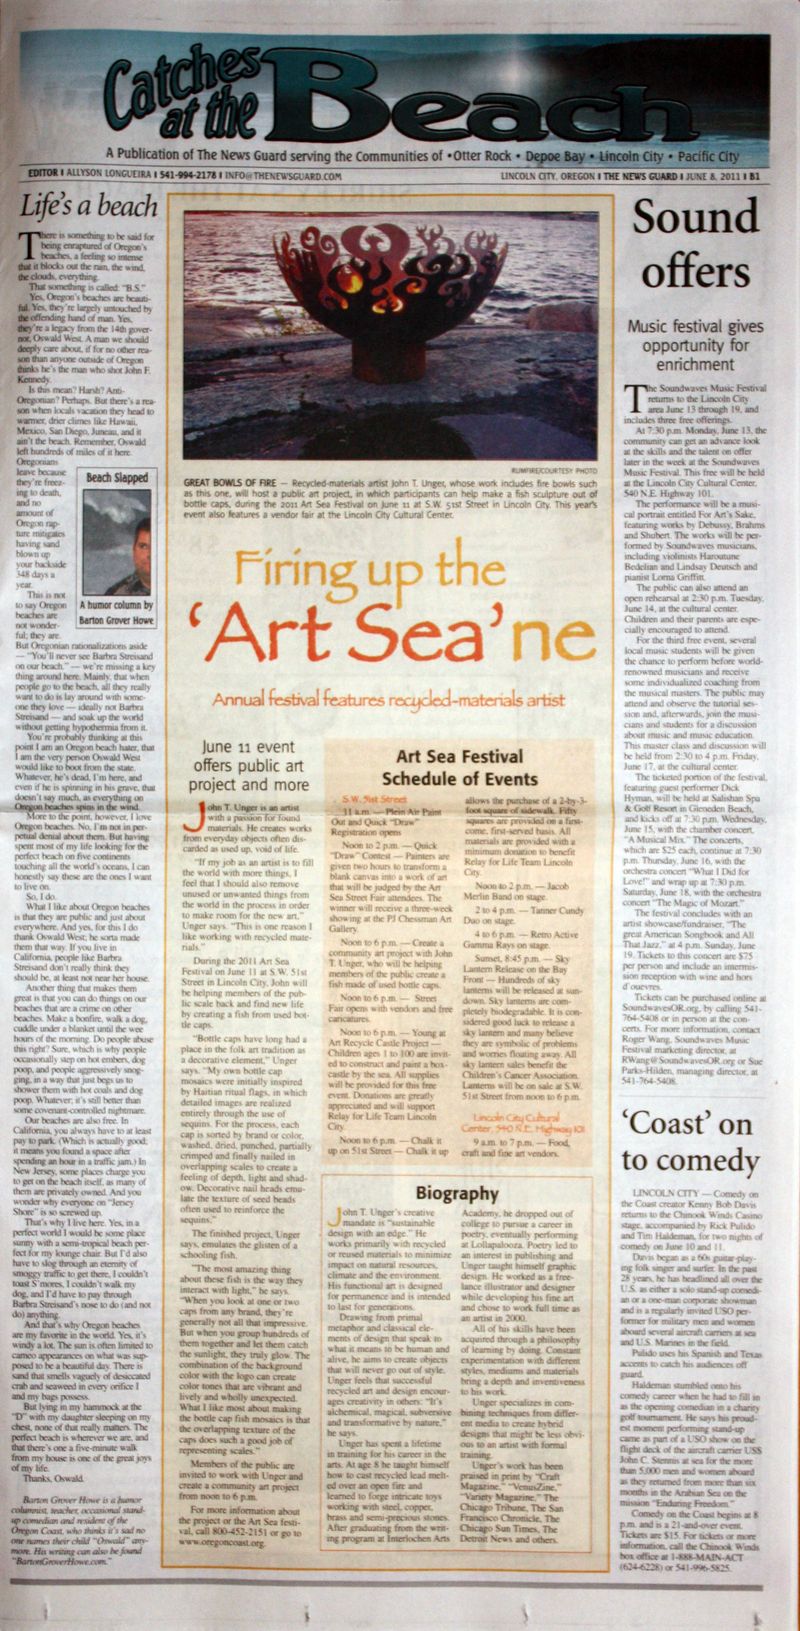 "Firing up the 'Art Sea'ne." The News Guard [Lincoln City, OR] 8 June 2011: Front Cover, B1. Print.